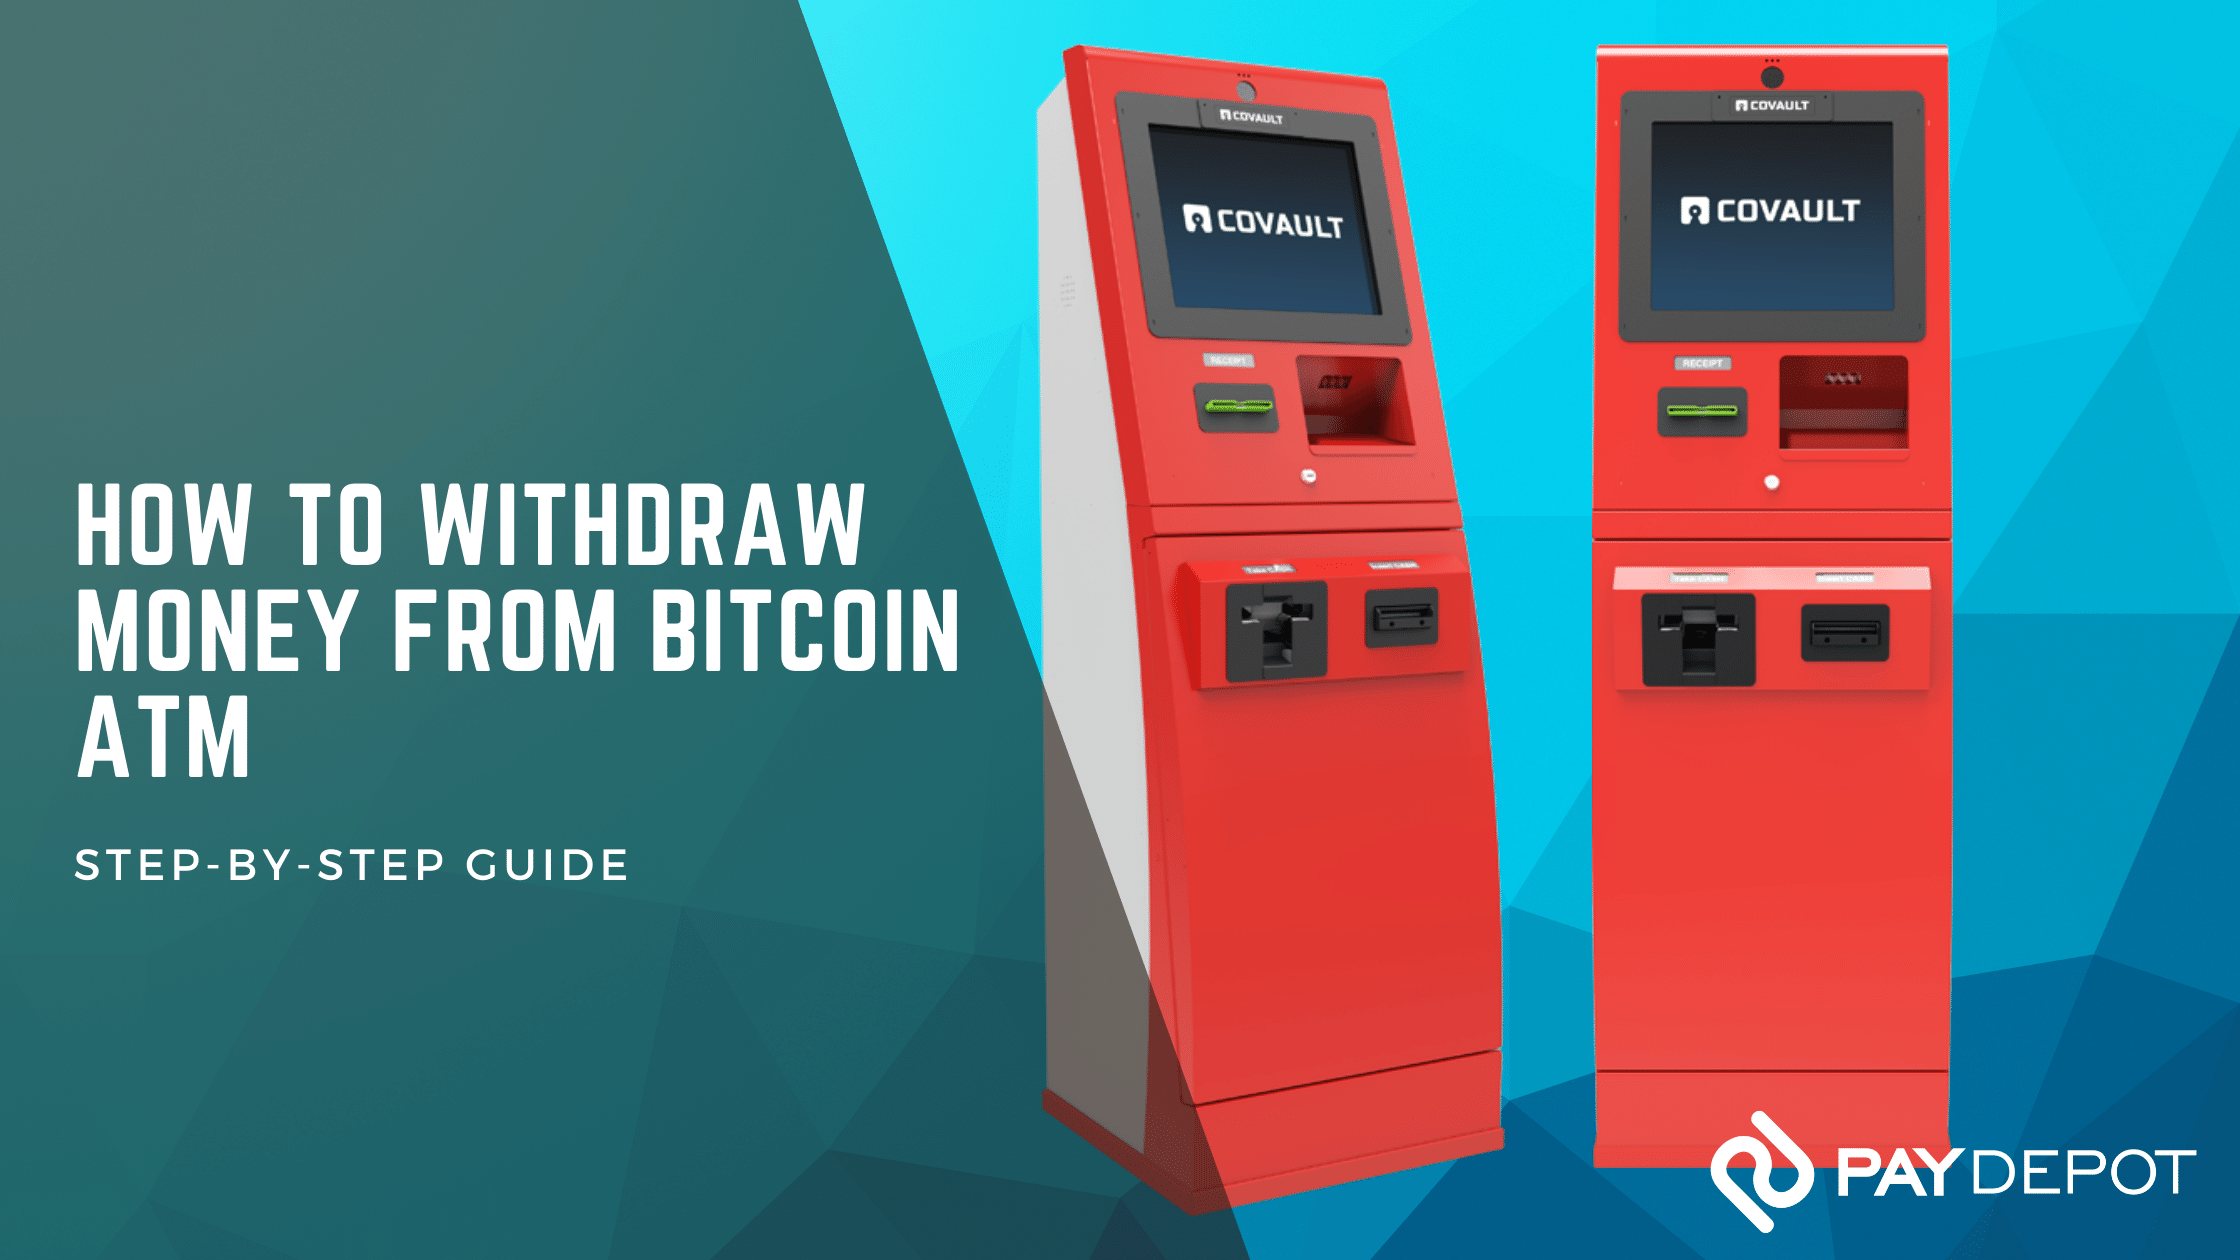 Guide | Bitcoin ATM Withdrawal Limits